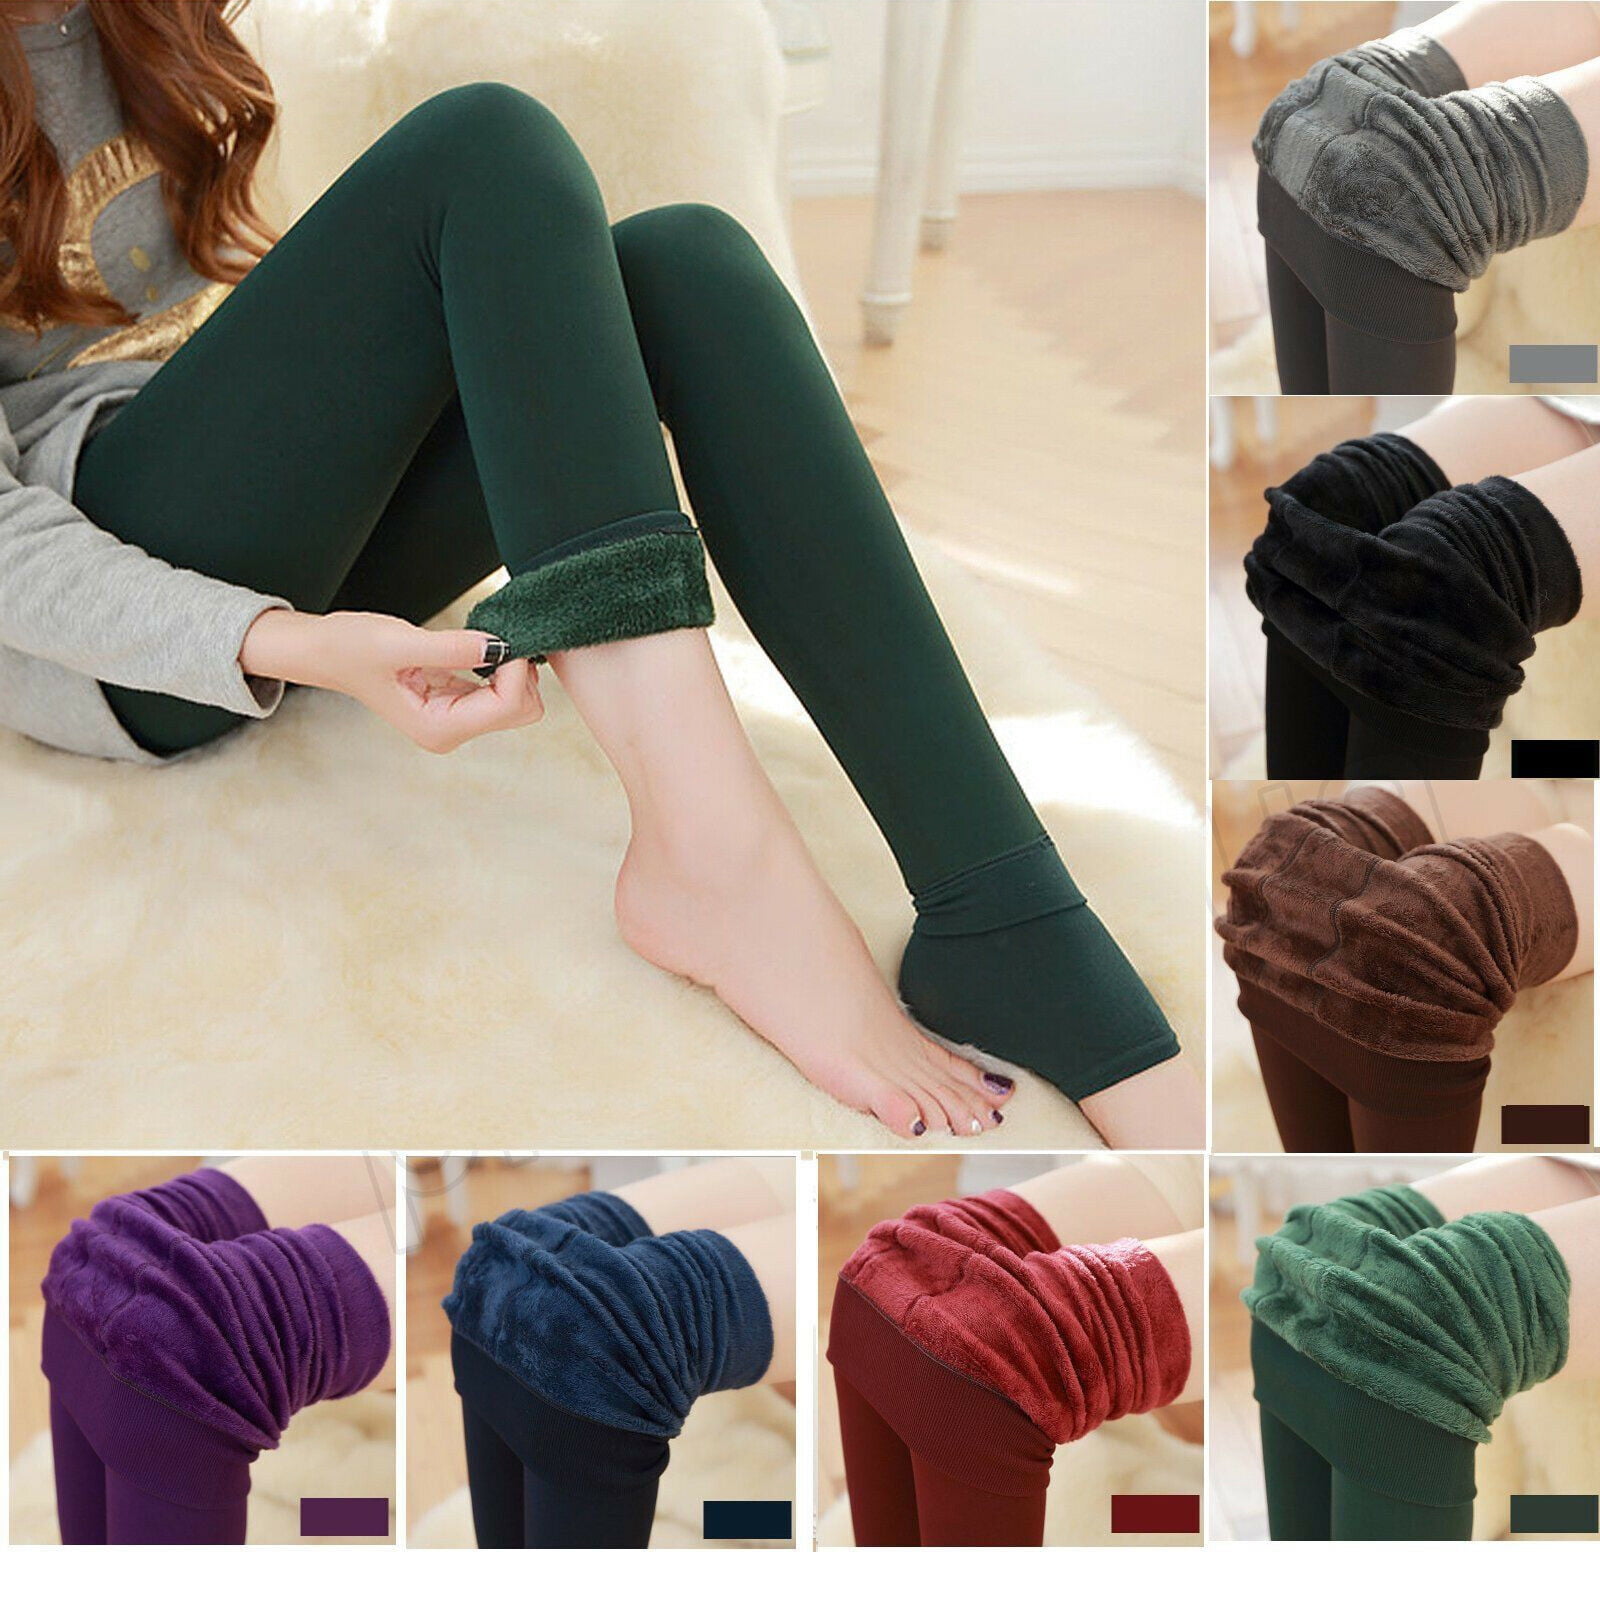 Women's Solid New Winter Thick Warm Fleece Lined Thermal Stretchy Leggings Pants 